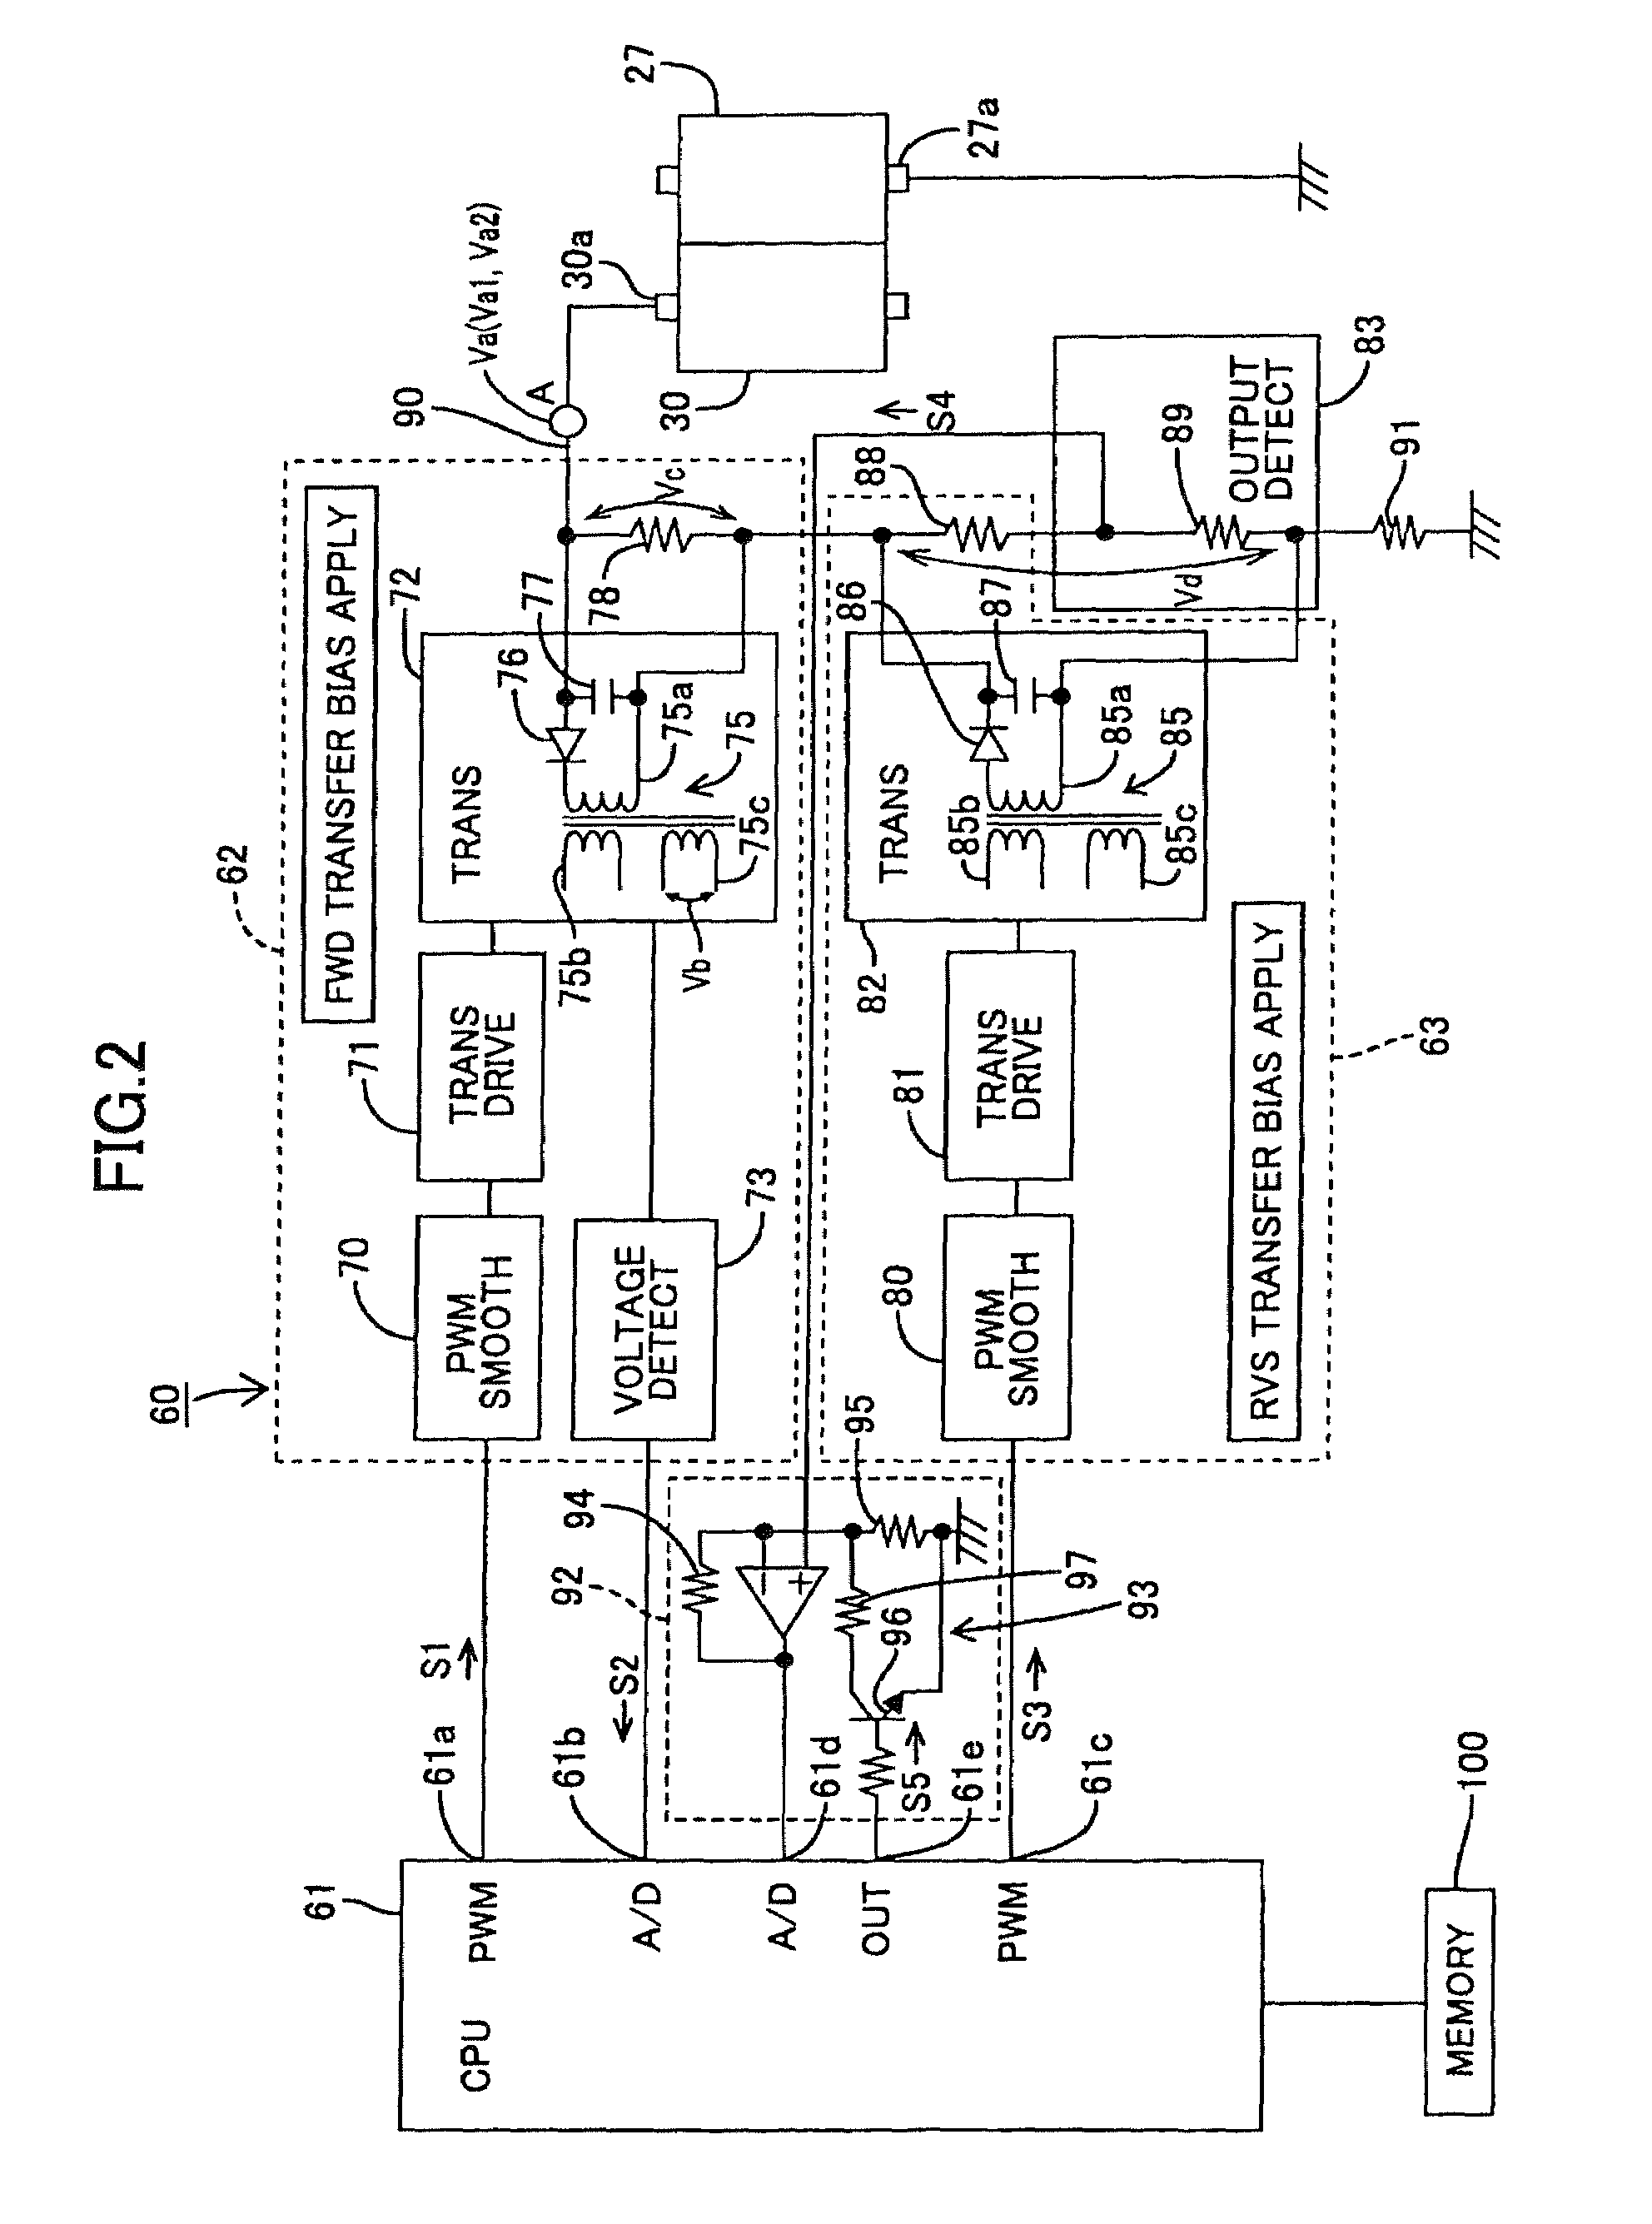 Image-forming device with power supplying unit